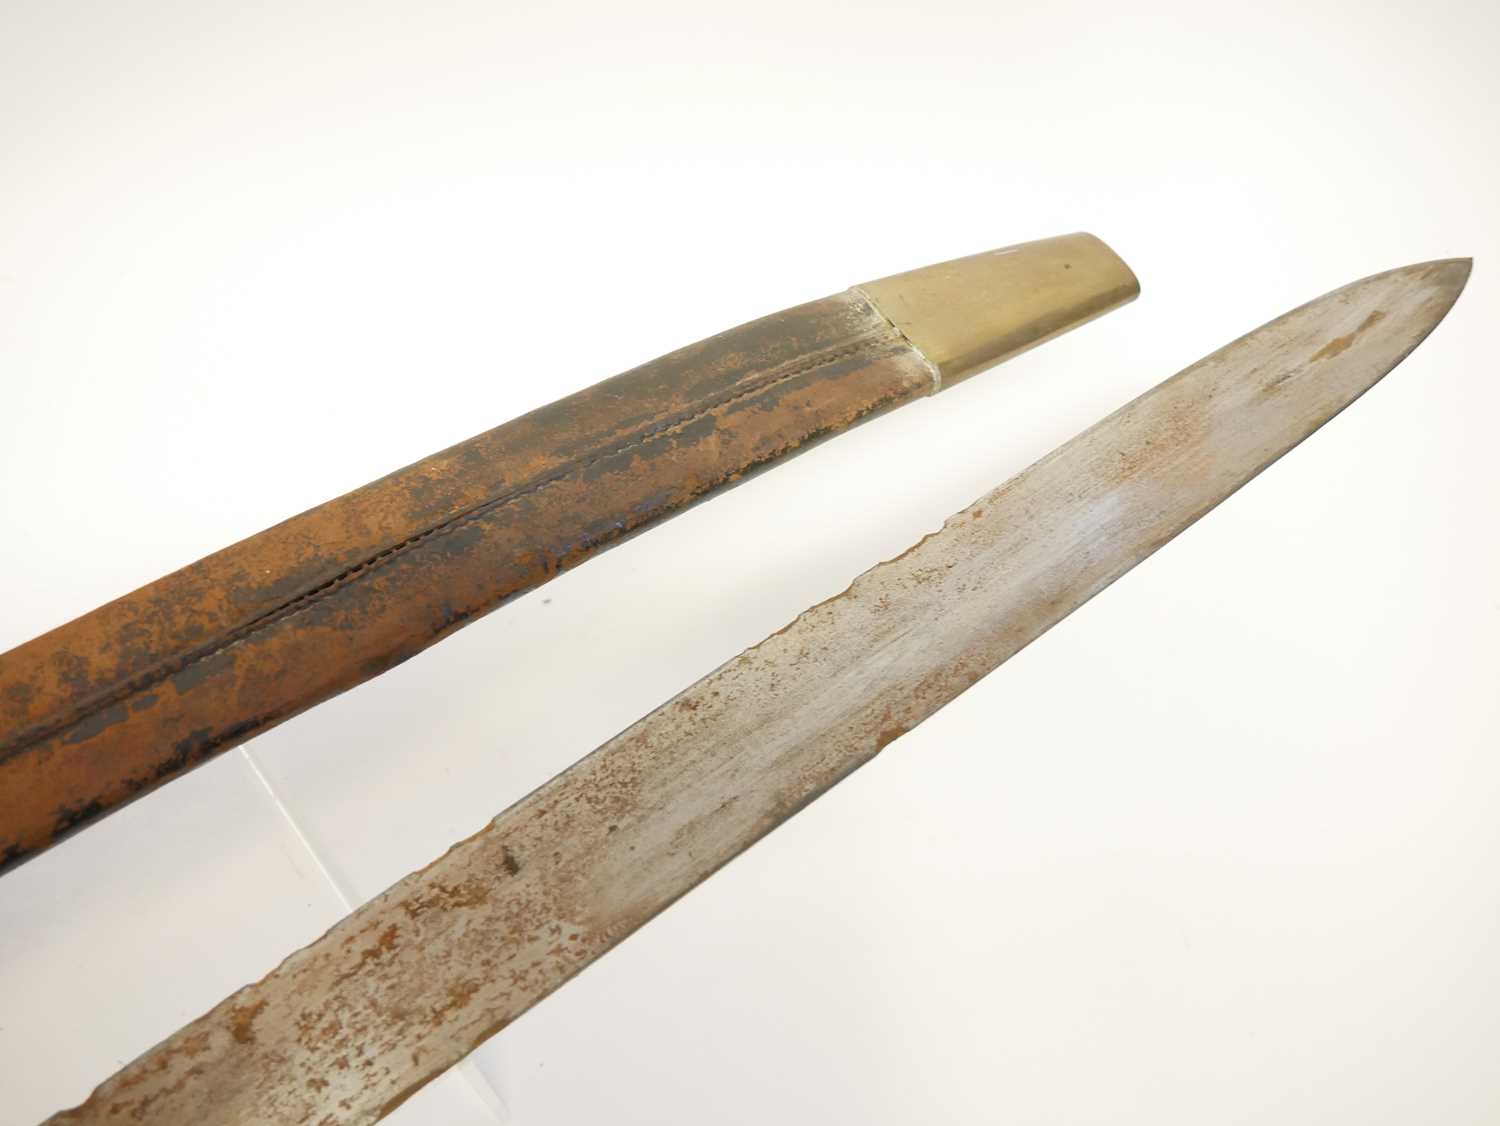 Wilkinson lead cutter No.3 sword, for strength training and feats of swordsmanship, 32.5-inch - Image 8 of 11